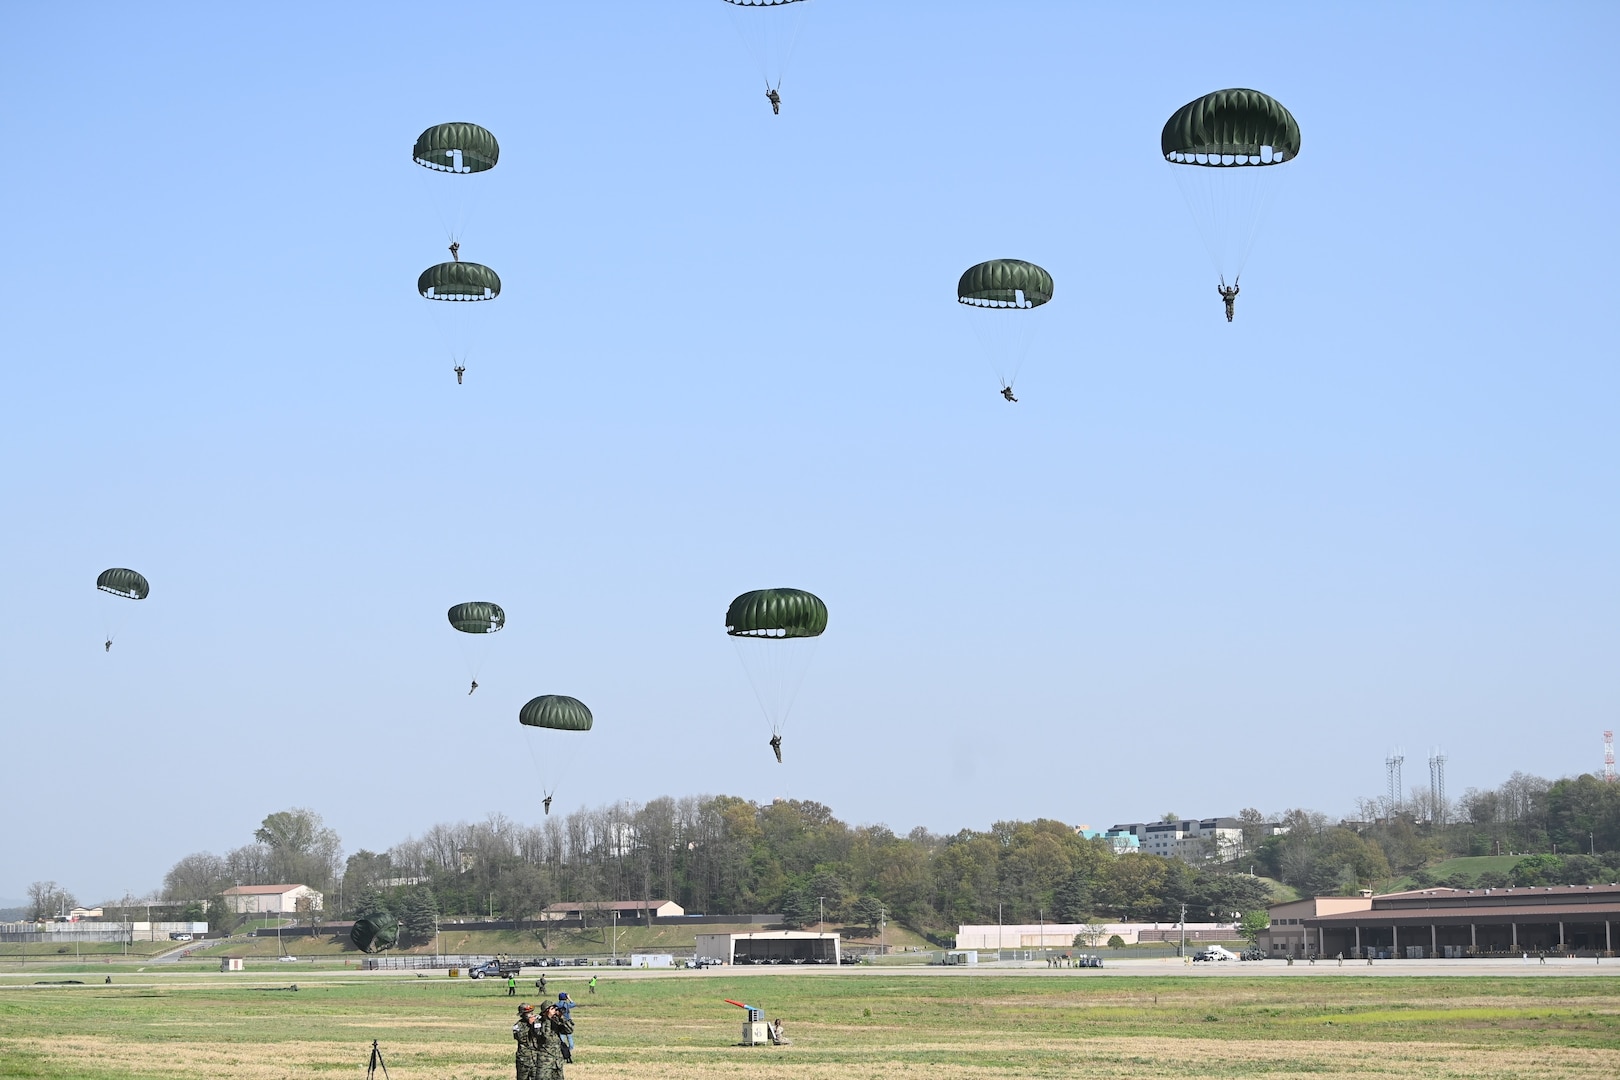 Special operations forces personnel land on a drop zone during a training event at Osan Air Base, Republic of Korea, April 18, 2024. Approximately 300 U.S. and Republic of Korea special operations forces personnel participated in a static-line Airborne training operation as part of Korea Flying Training 24, a combined ROK and U.S. exercise running April 12-26. (U.S. Air Force photo by Master Sgt. Eric Burks)